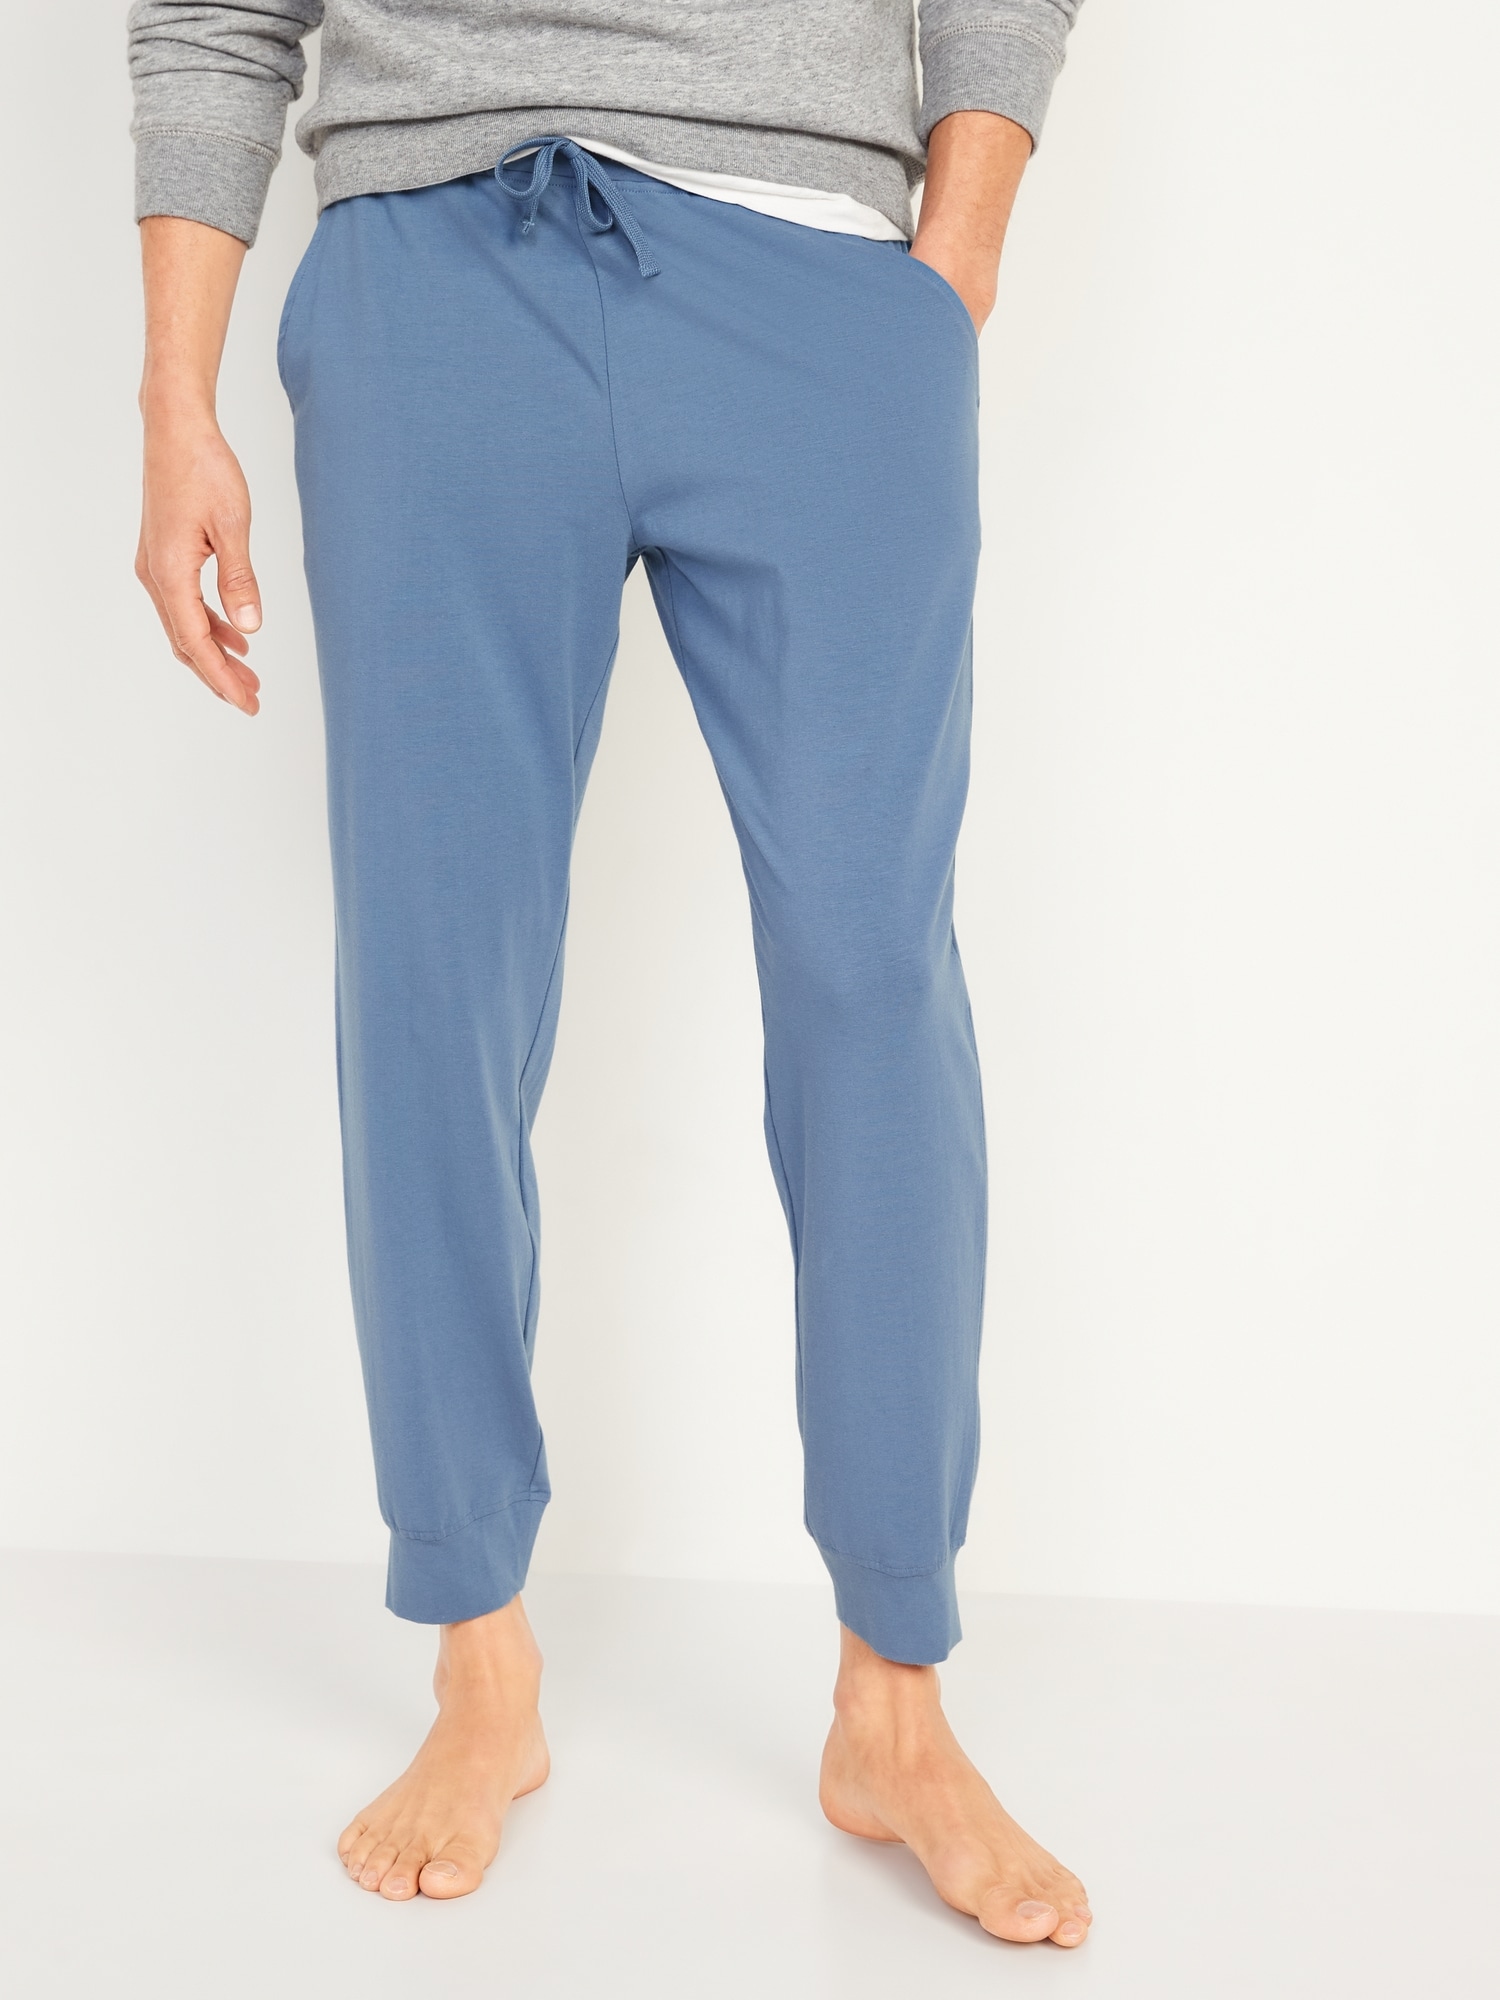 Mid-Rise UltraLite Foldover-Waist Flare Lounge Pants | Old Navy